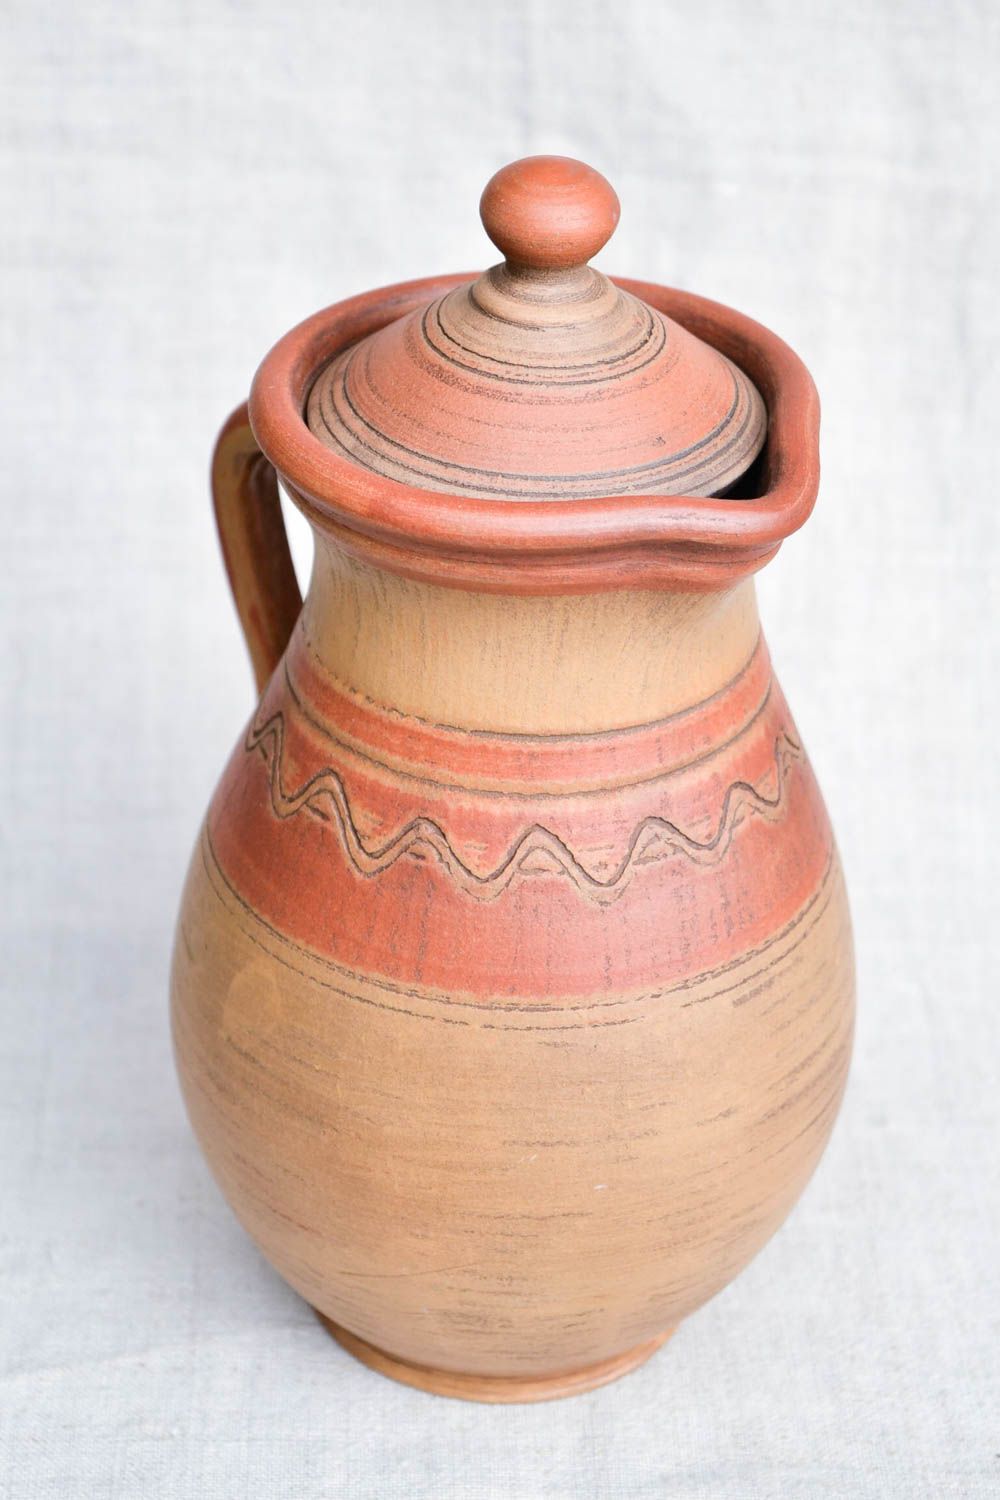 60 oz ceramic terracotta milk pitcher with handle and lid 13 inches, 2 lb photo 3